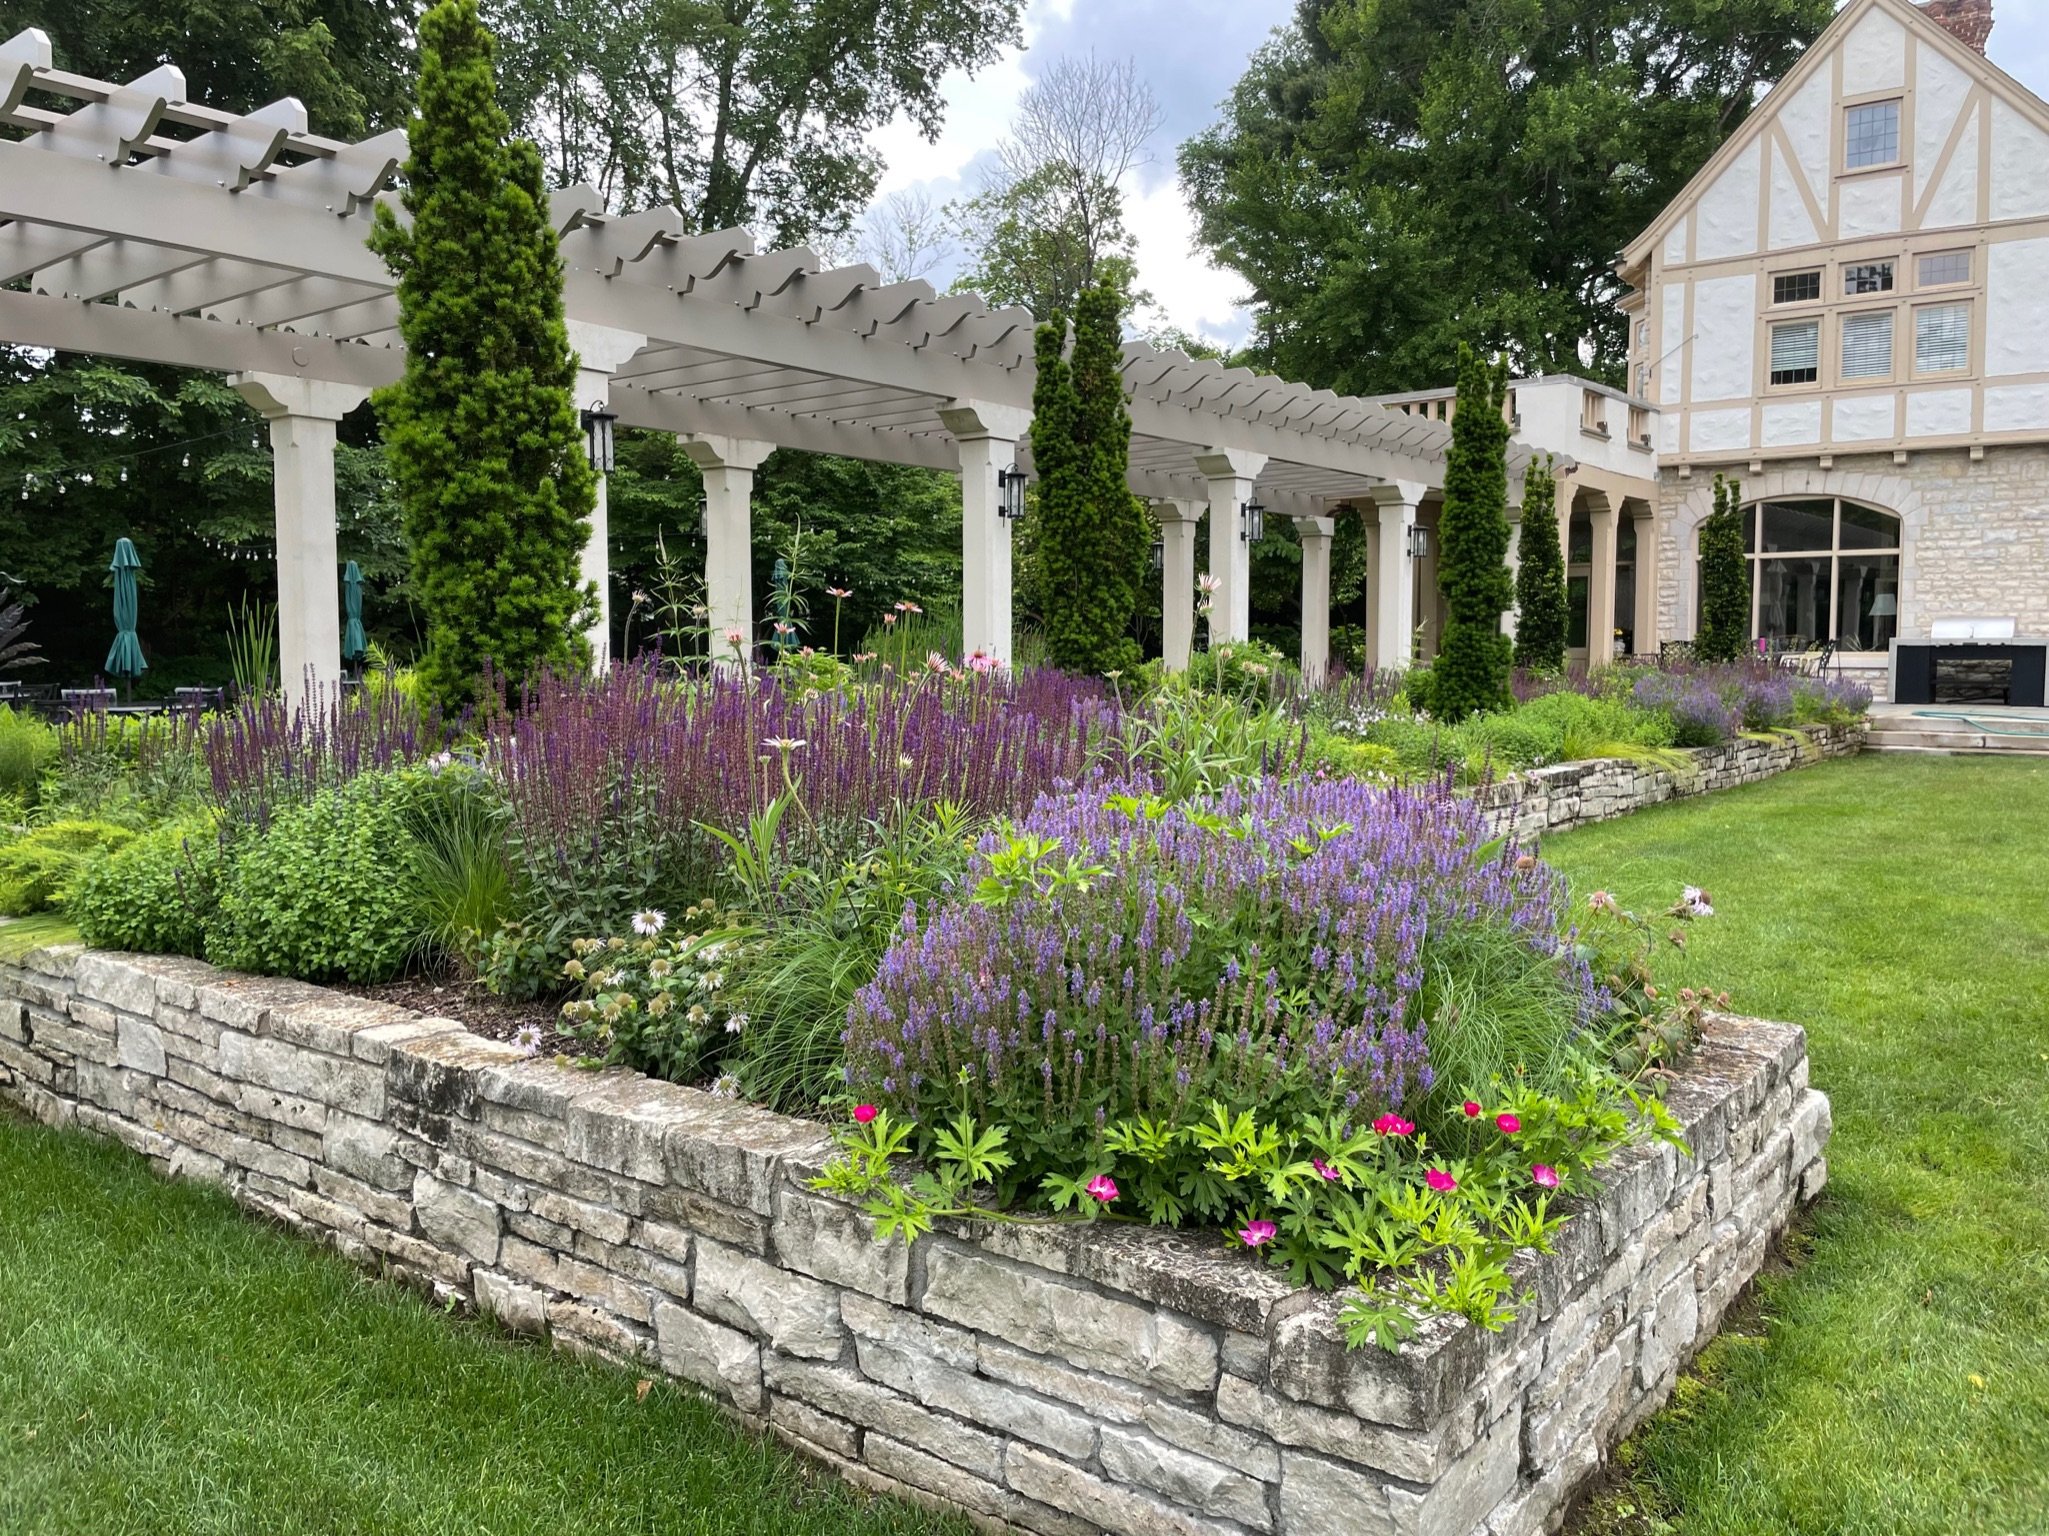  Recent restoration efforts led by current First Lady Fran DeWine have included the establishment of the First Lady’s Terrace Garden in the Heritage Garden and rebuilding the pergola in the Heritage Garden. 